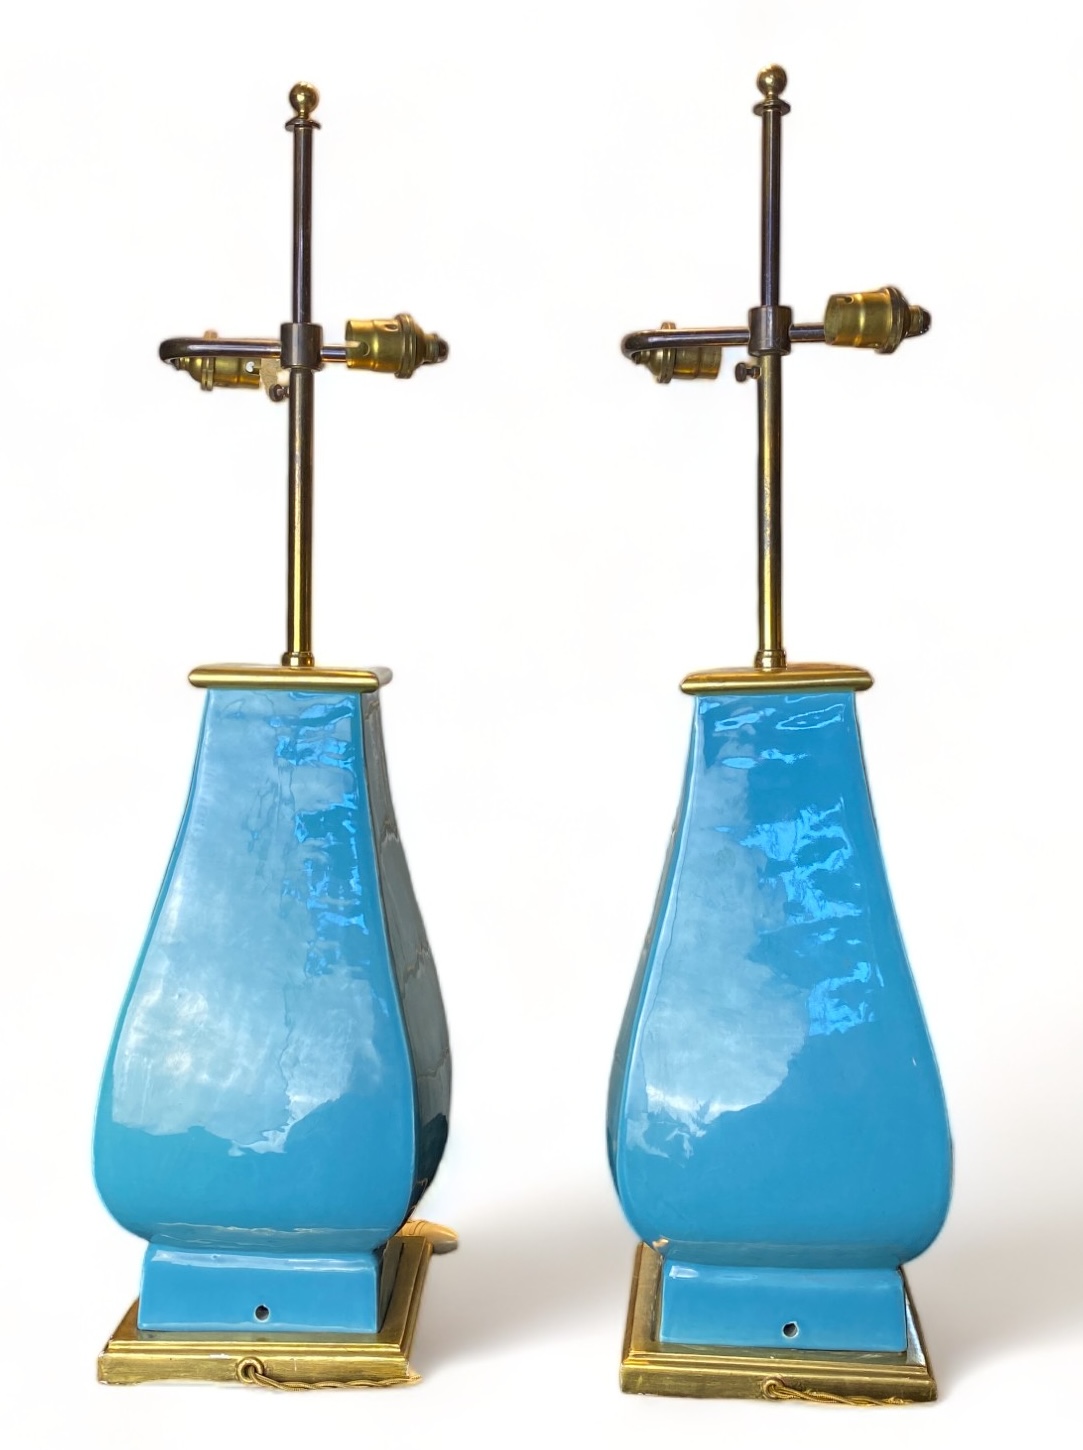 A pair of Mallets 20th century light blue ceramic twin-light table lamps - Image 3 of 6